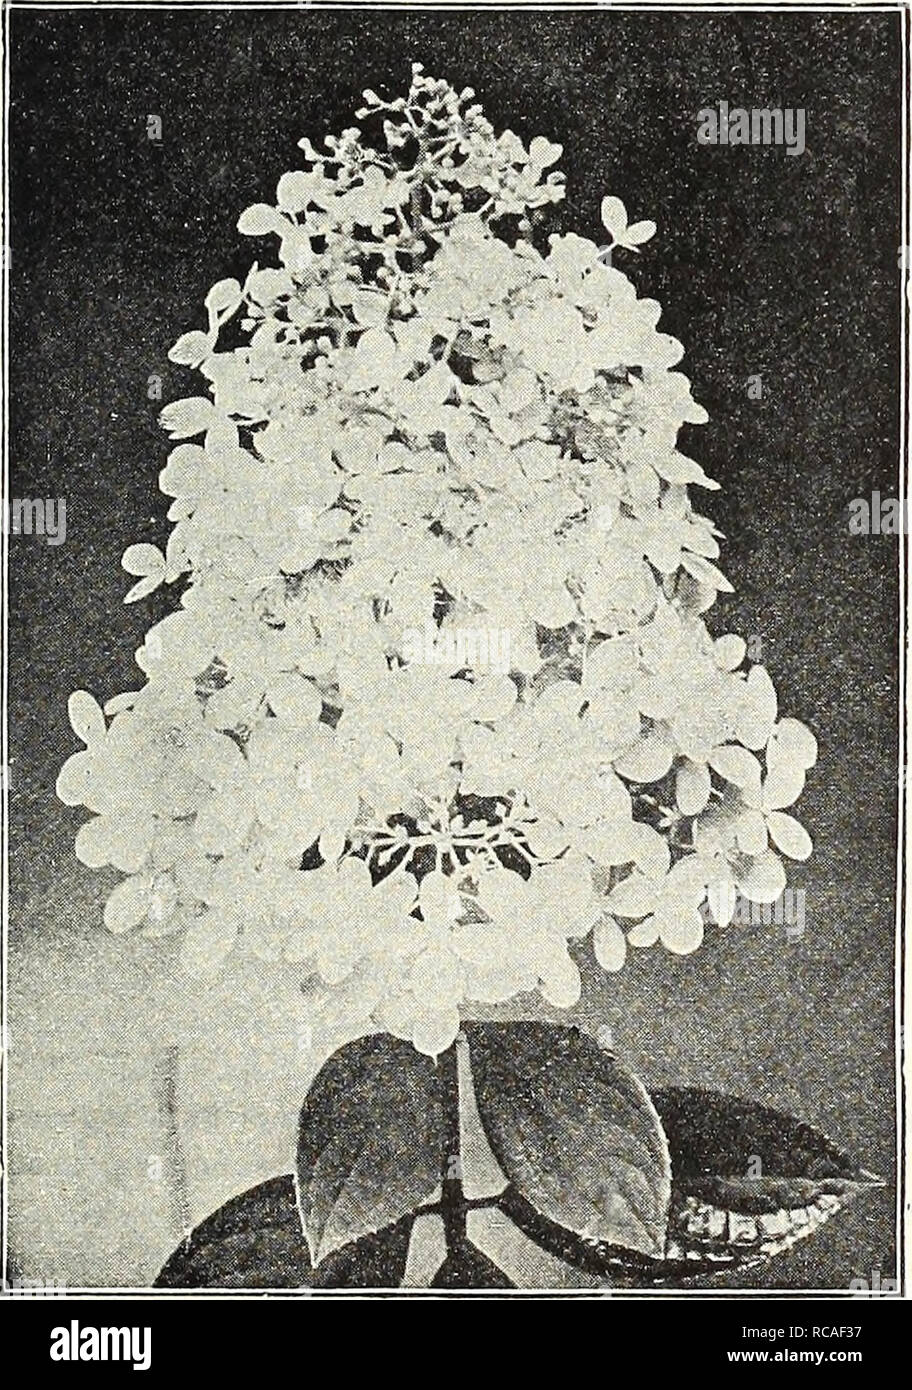 . Dreer's autumn catalogue 1922. Bulbs (Plants) Catalogs; Flowers Seeds Catalogs; Gardening Equipment and supplies Catalogs; Nurseries (Horticulture) Catalogs; Vegetables Seeds Catalogs. Deutzia Crfnata Magnifica. A tall Shrub of willowy covered with golden yel- Hyukangea Paniculata Gkandiflora Evonymus Europaea (BKruiug Bush). A very conspicuous, tall Shrub, which In the autumn and winter is loaded with scarlet seed pods, from which orange-colored berries hang on slender threads. 60 cts. each. Exochorda Grandiflora {Pearl Bush). A medium-sized Shrub, bearing whl.e flowers in slender racemes i Stock Photo